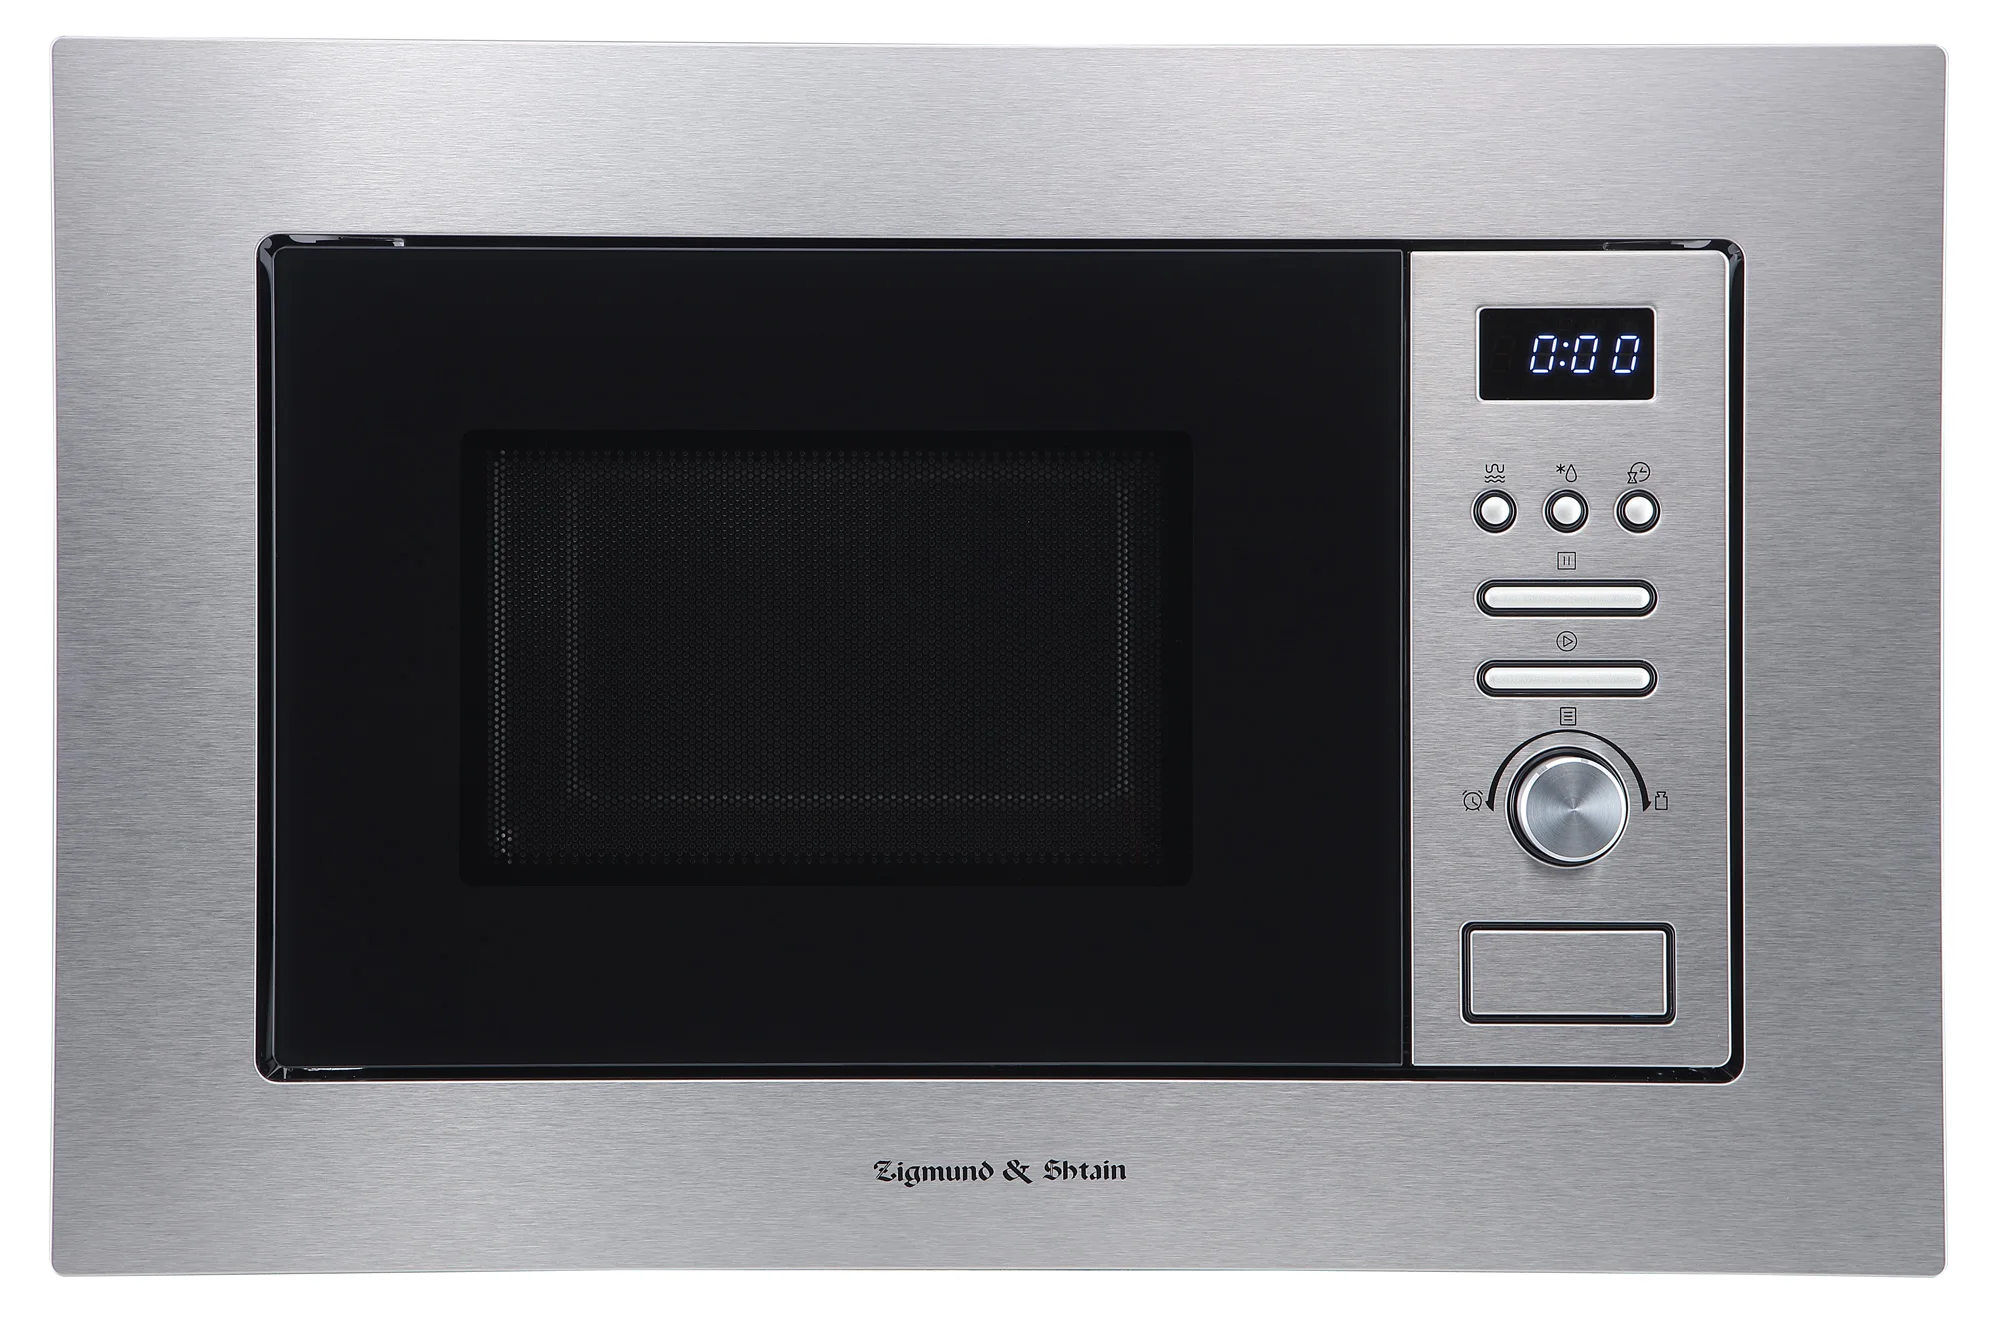 US $257.94 Bulitin Microwave Ovens Zigmund  Shtain BMO 16202 S builtin embedded Microwave oven  Home Appliances Major Appliances Kitchen